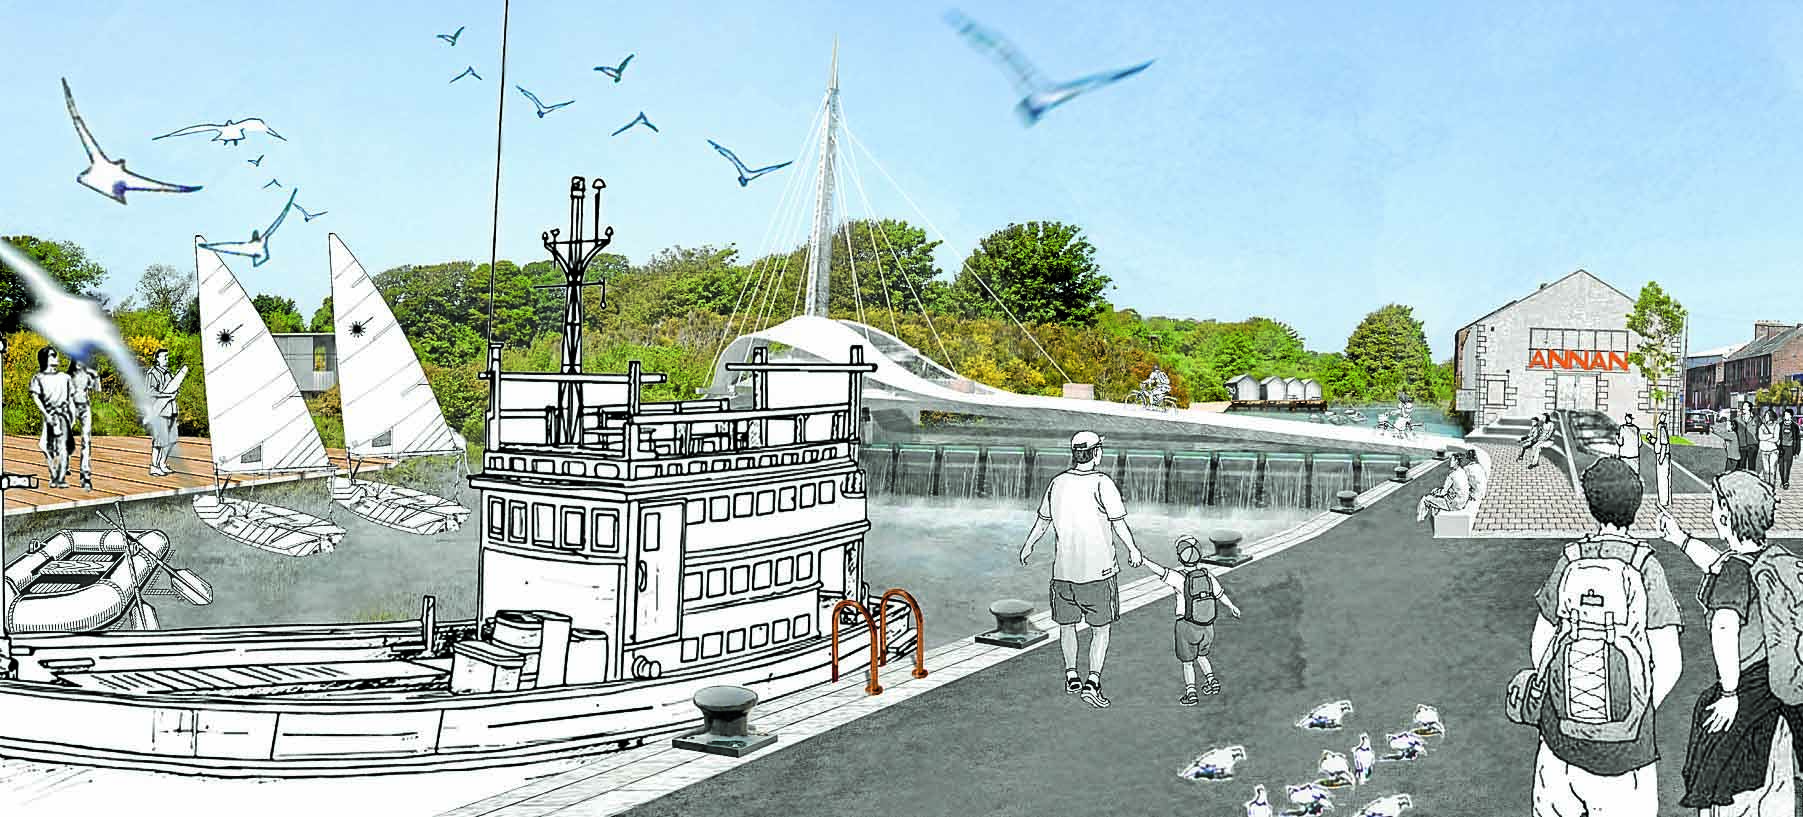 Quayside’s future new look unveiled